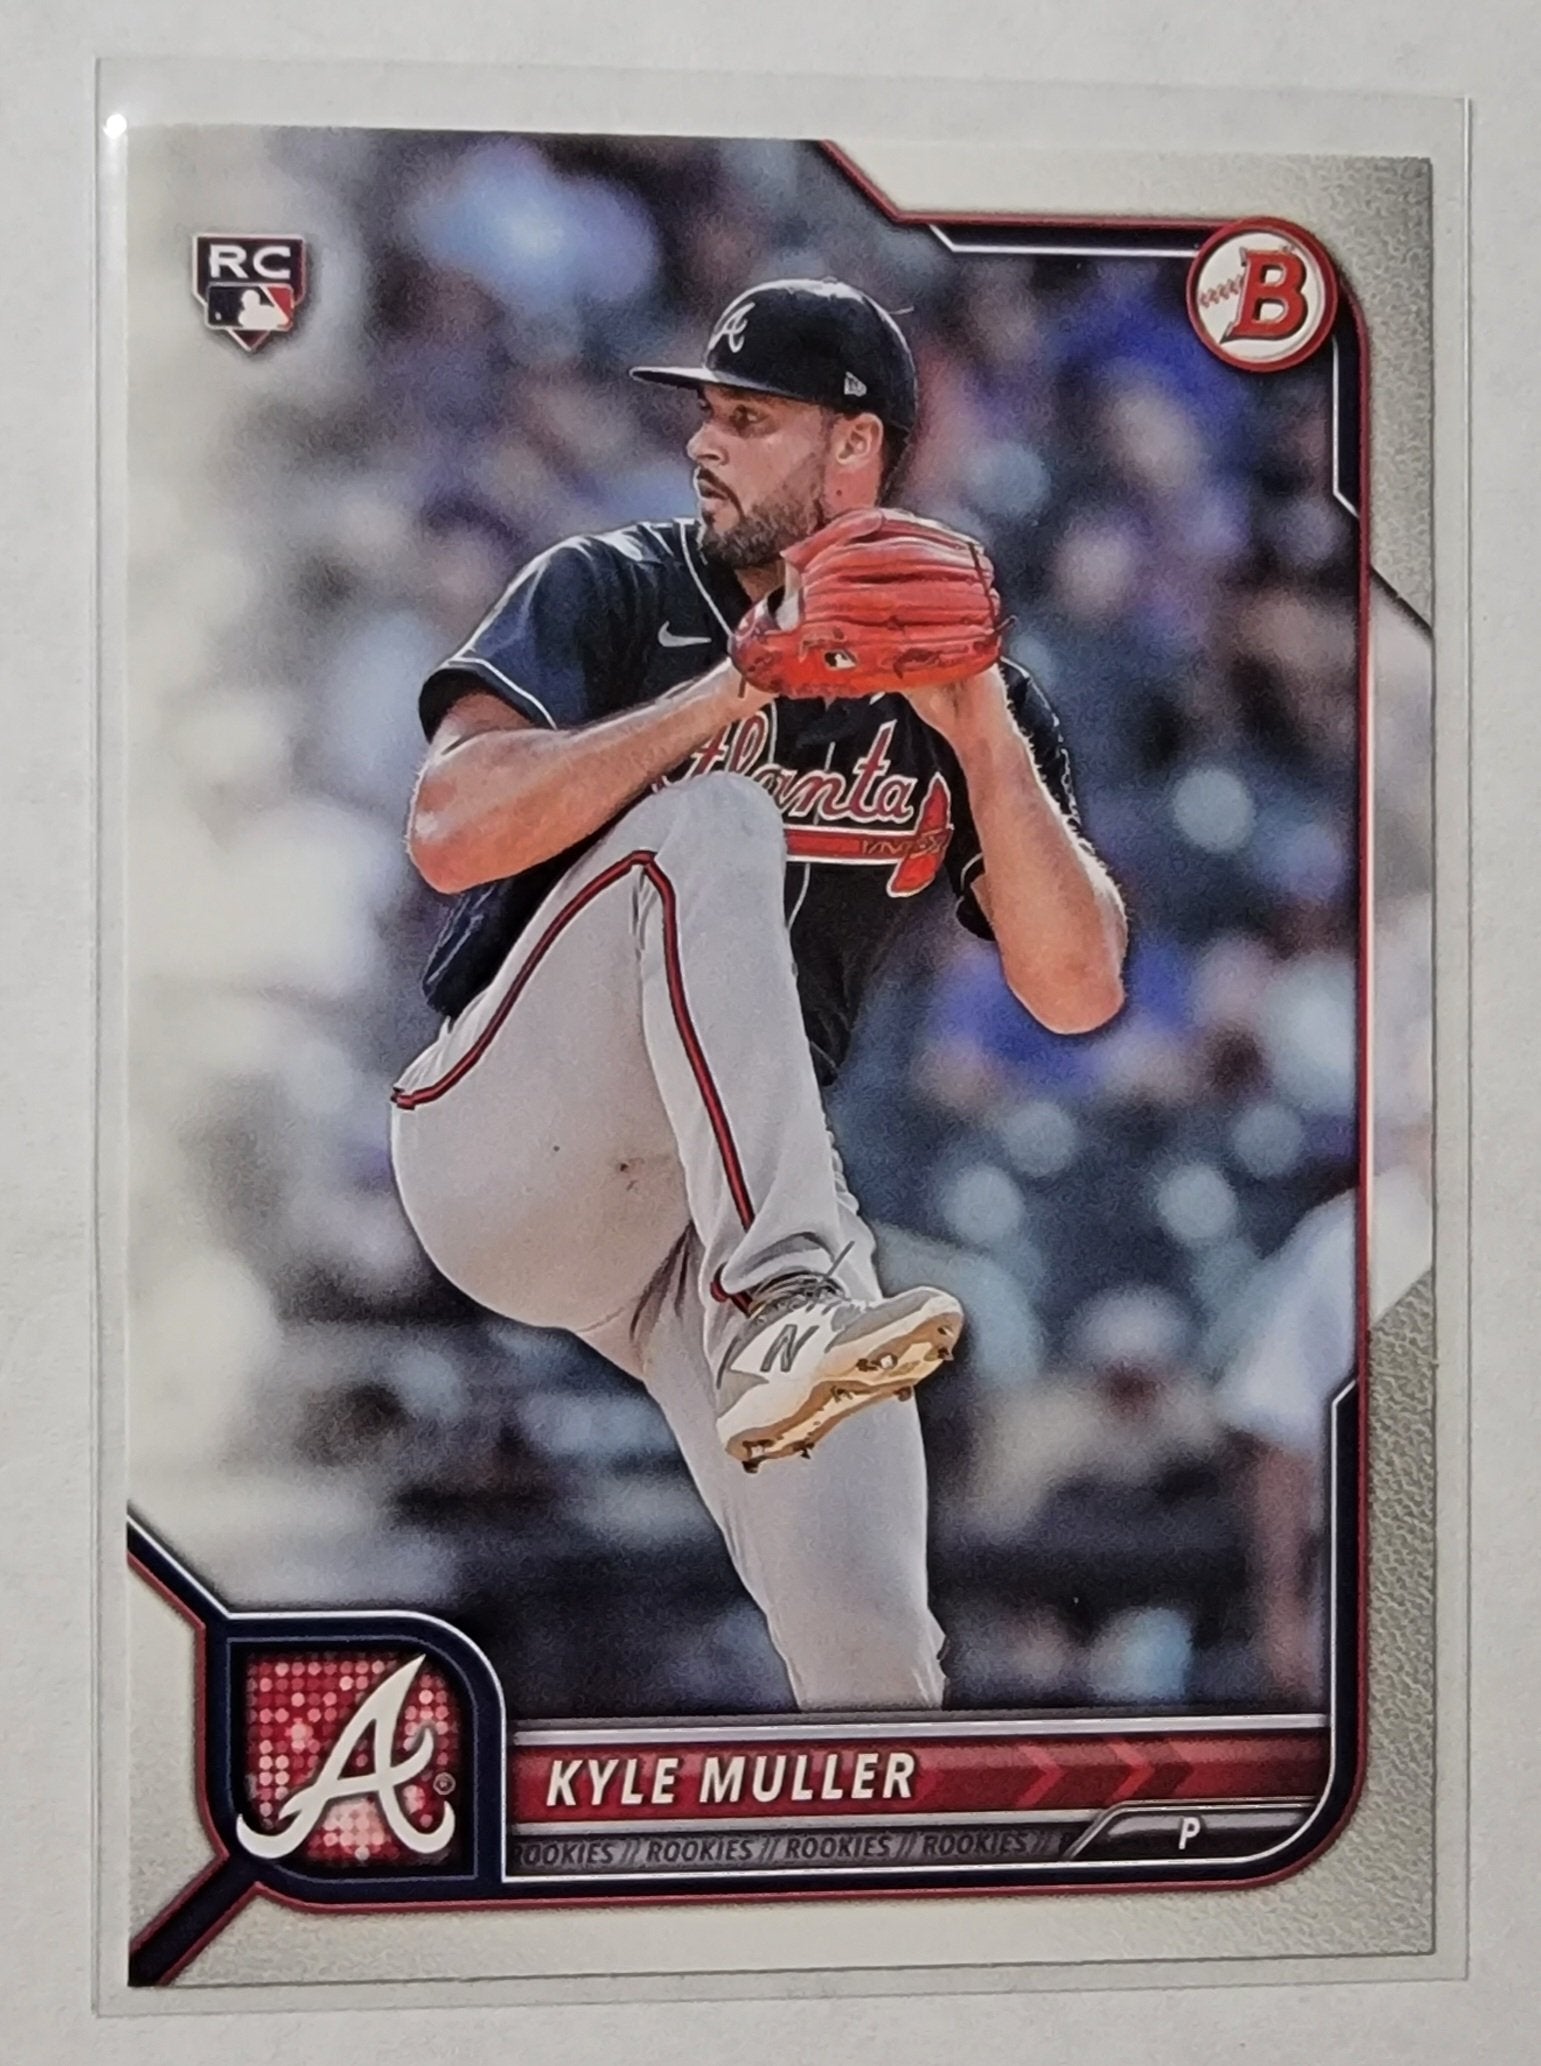 2022 Bowman Kyle Muller Mega Box Paper Rookie Baseball Card AVM1 simple Xclusive Collectibles   